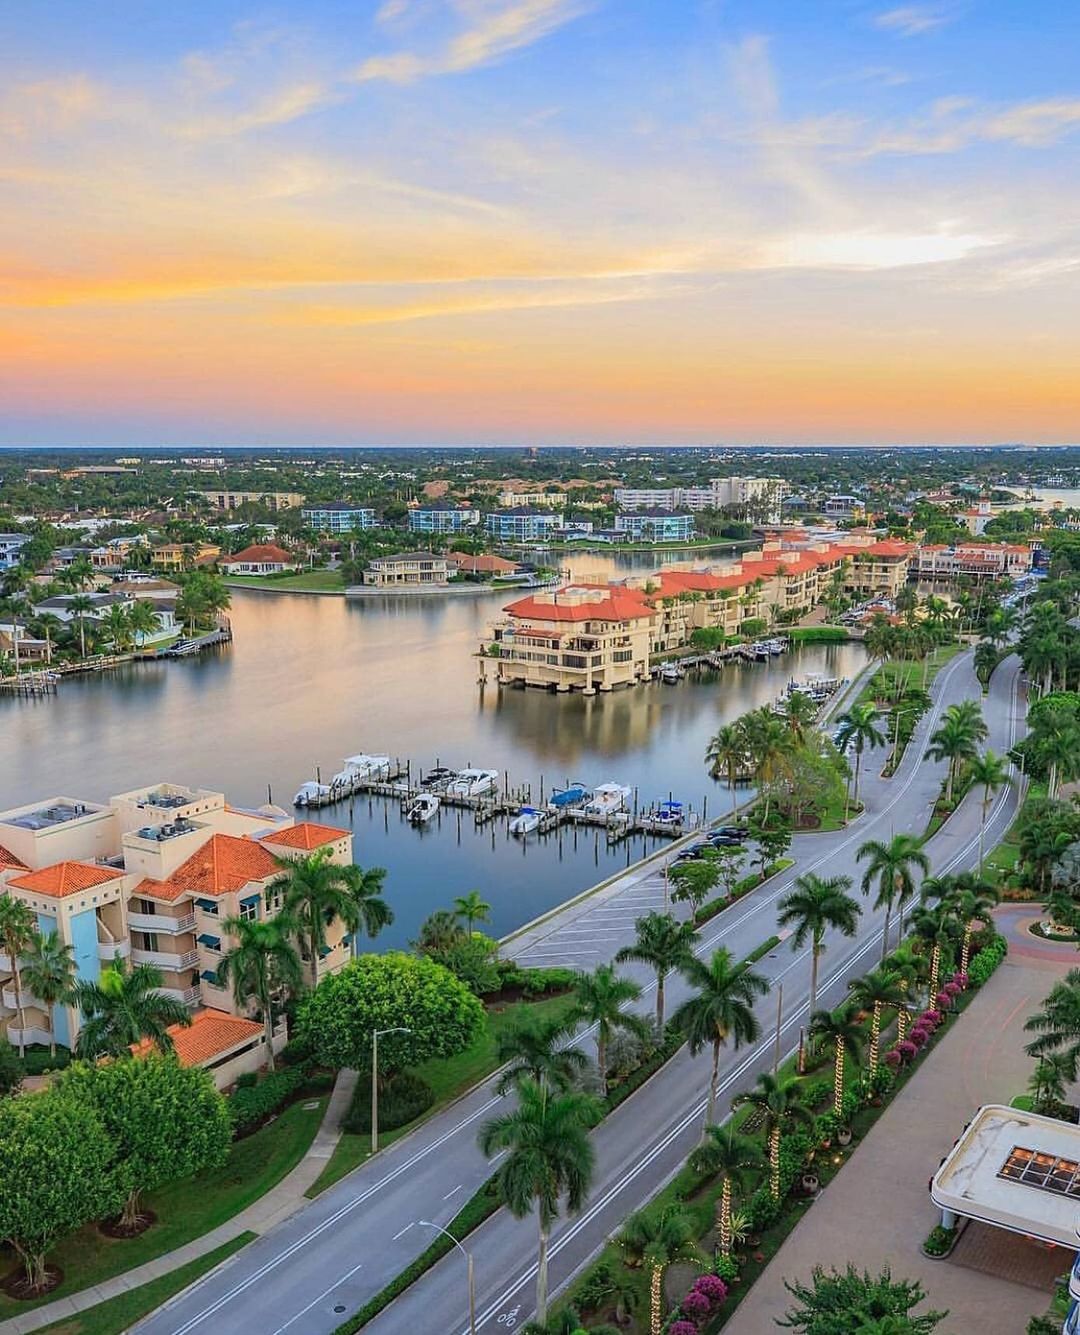 Aerial Photo of Condos at Dusk in Naples, FL. Photo by Instagram user @naplesswfl